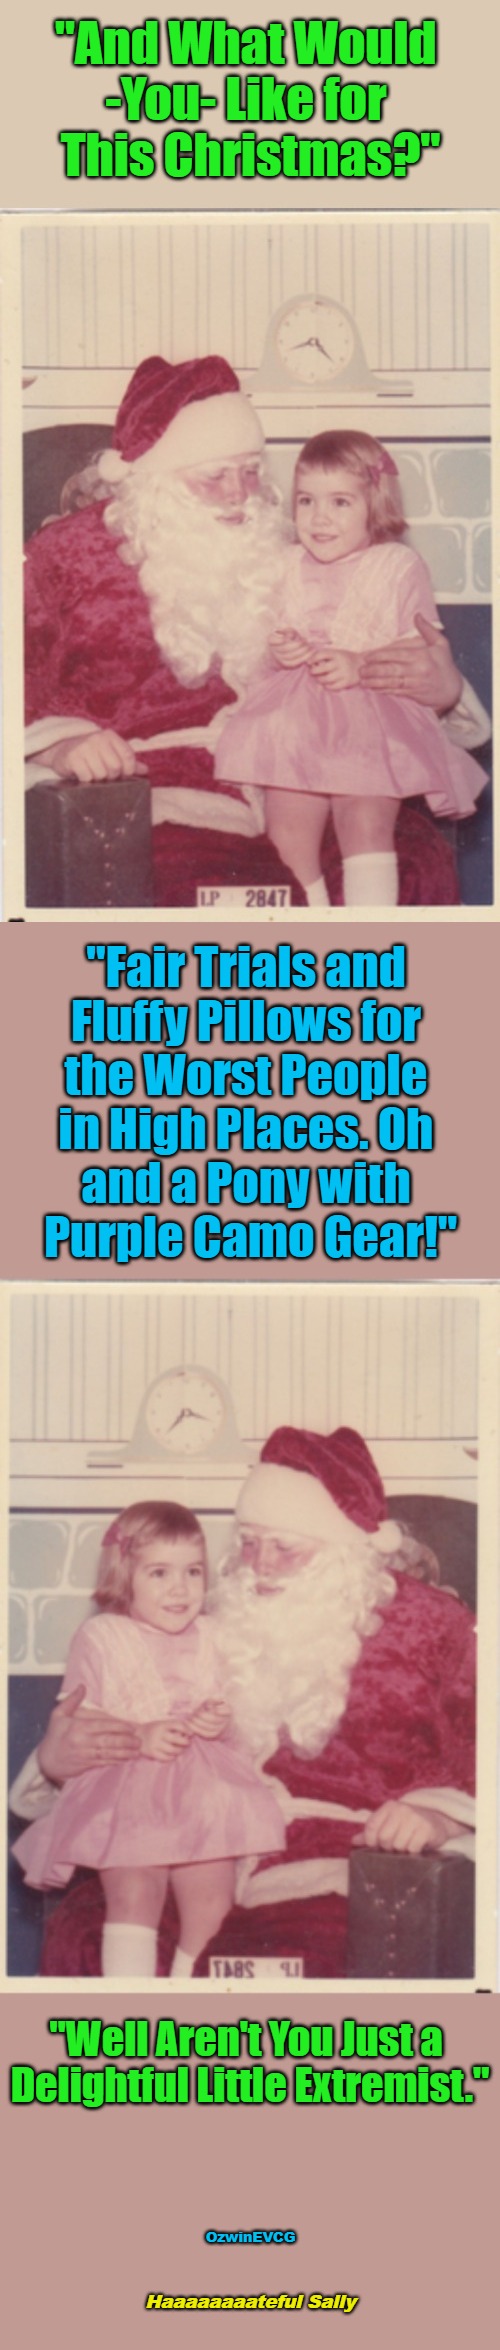 Haaaaaaaateful Sally | "And What Would 

-You- Like for 

This Christmas?"; "Fair Trials and 

Fluffy Pillows for 

the Worst People 

in High Places. Oh 

and a Pony with 

Purple Camo Gear!"; "Well Aren't You Just a 

Delightful Little Extremist."; OzwinEVCG; Haaaaaaaateful Sally | image tagged in asking santa,memes,far right,triggered,extreme,world occupied | made w/ Imgflip meme maker